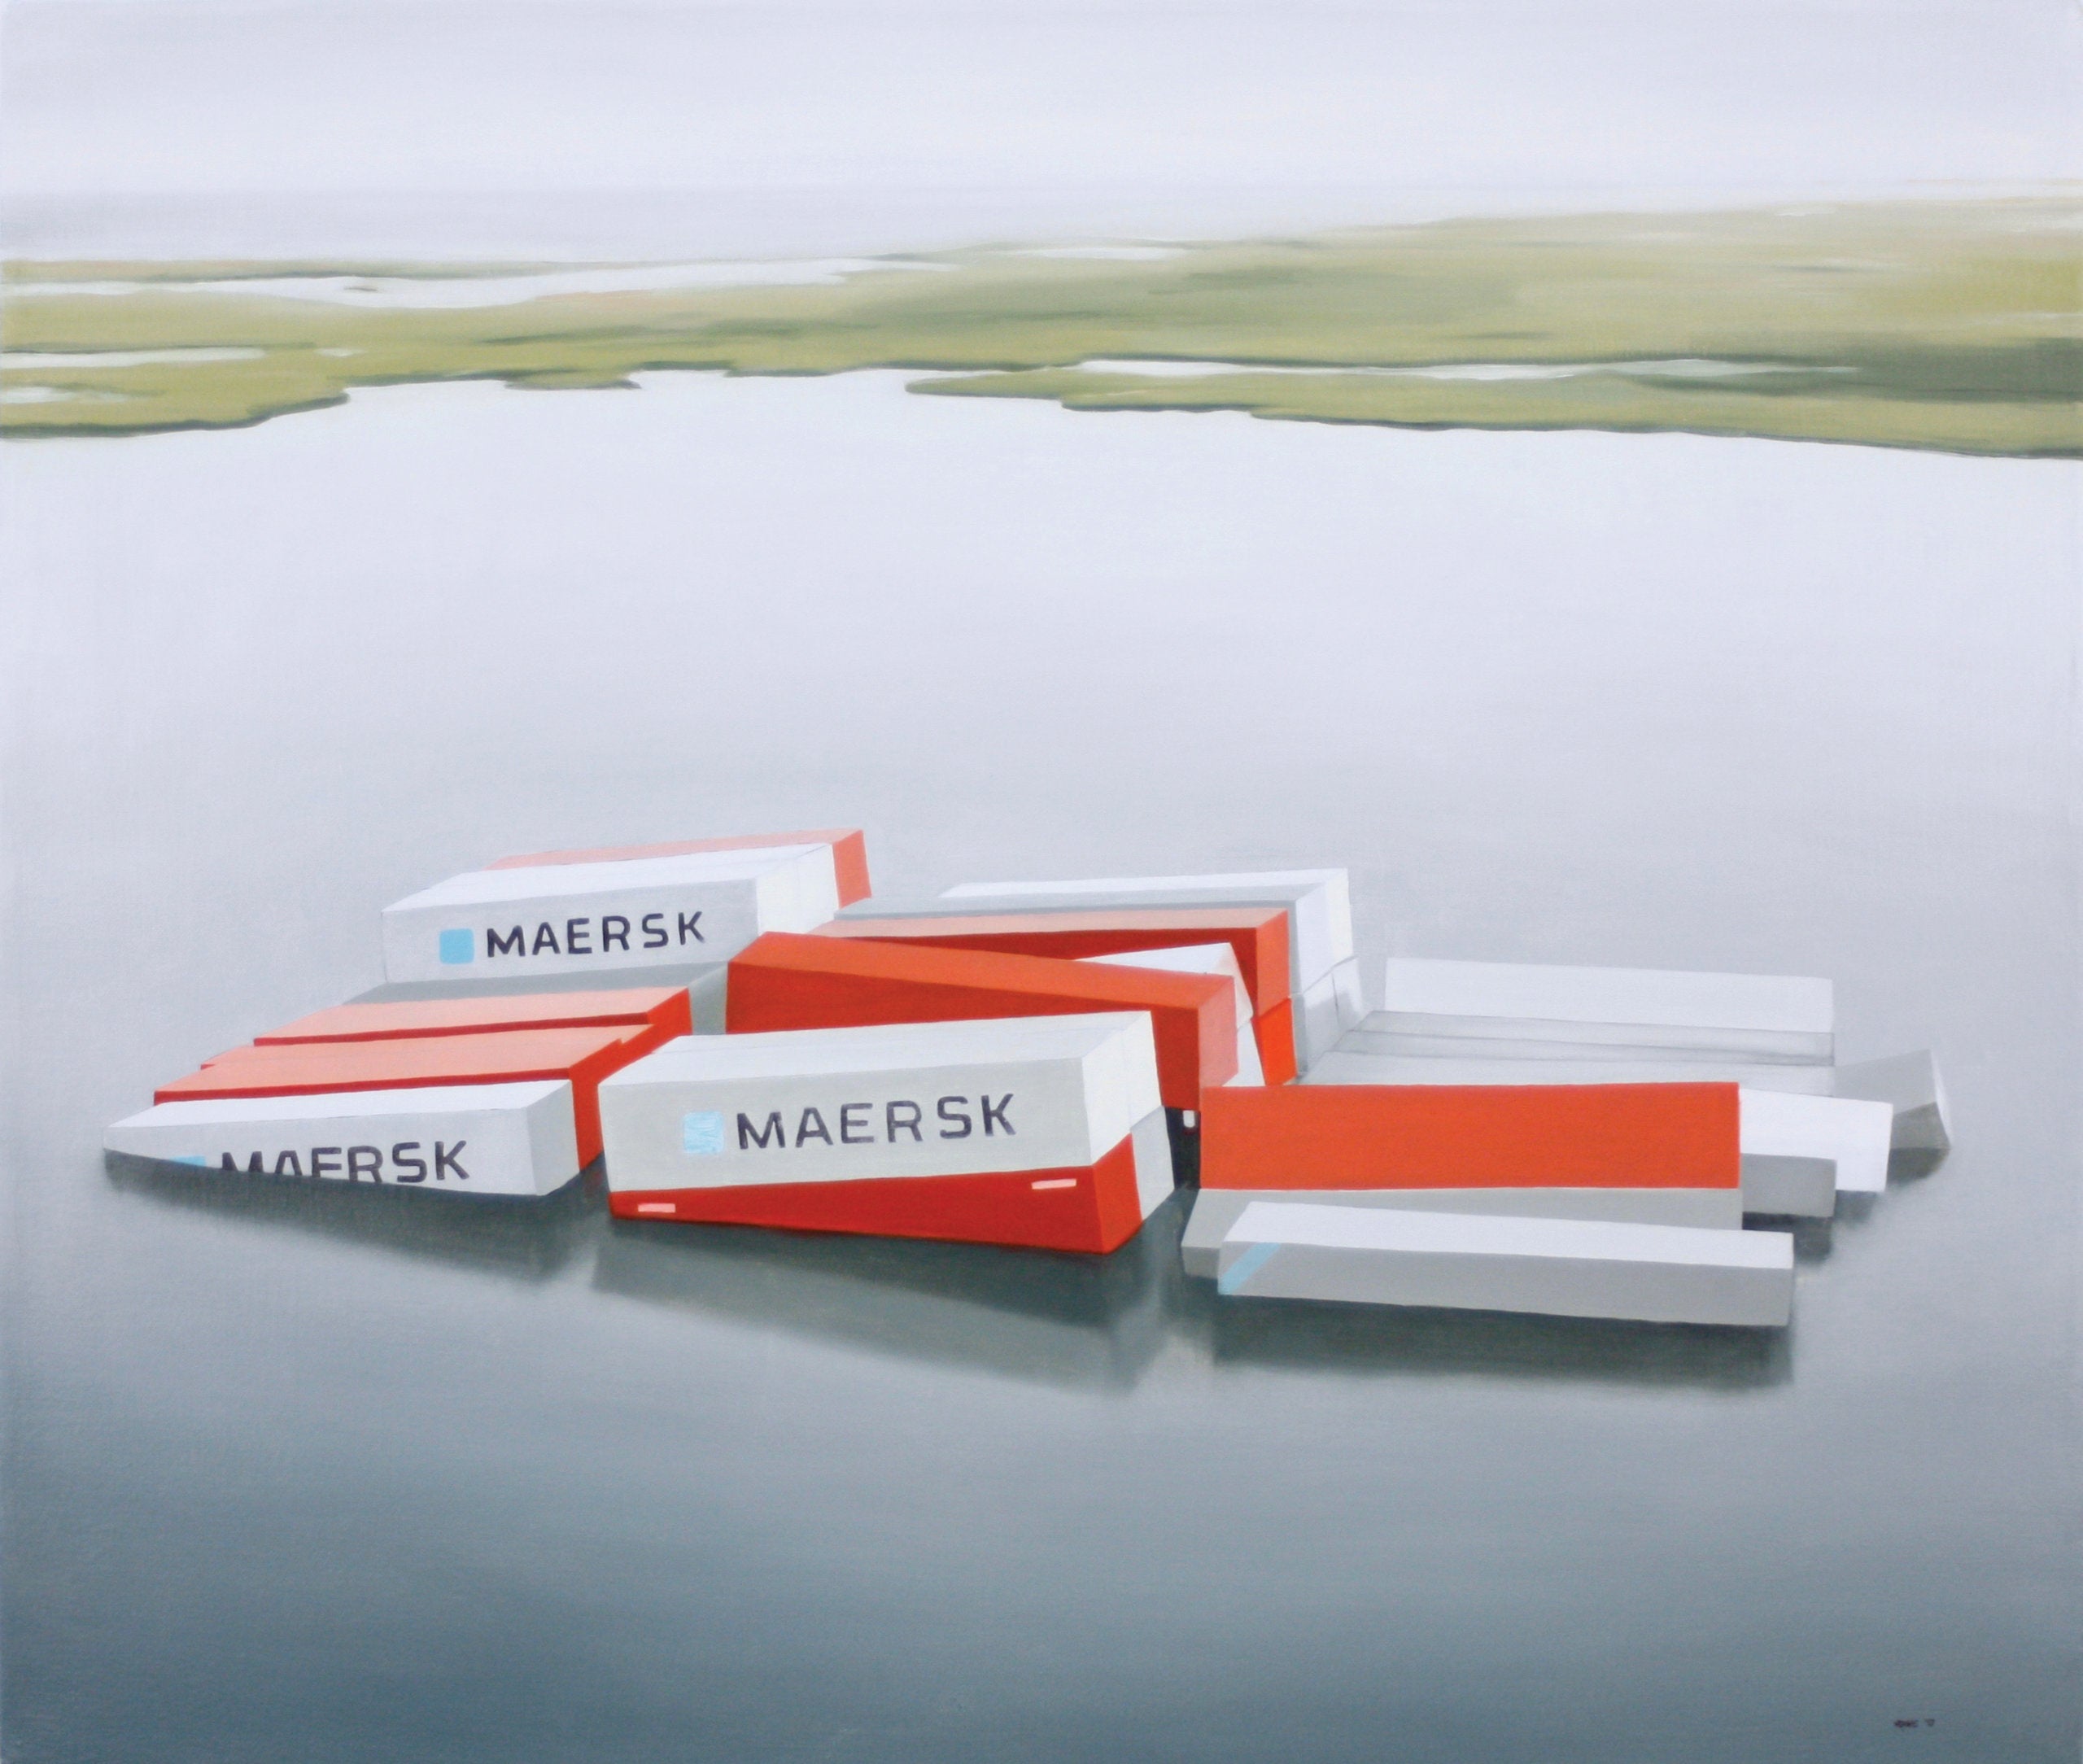 Painting by Mea Duke showing partially submerged shipping containers with Maersk written on the side